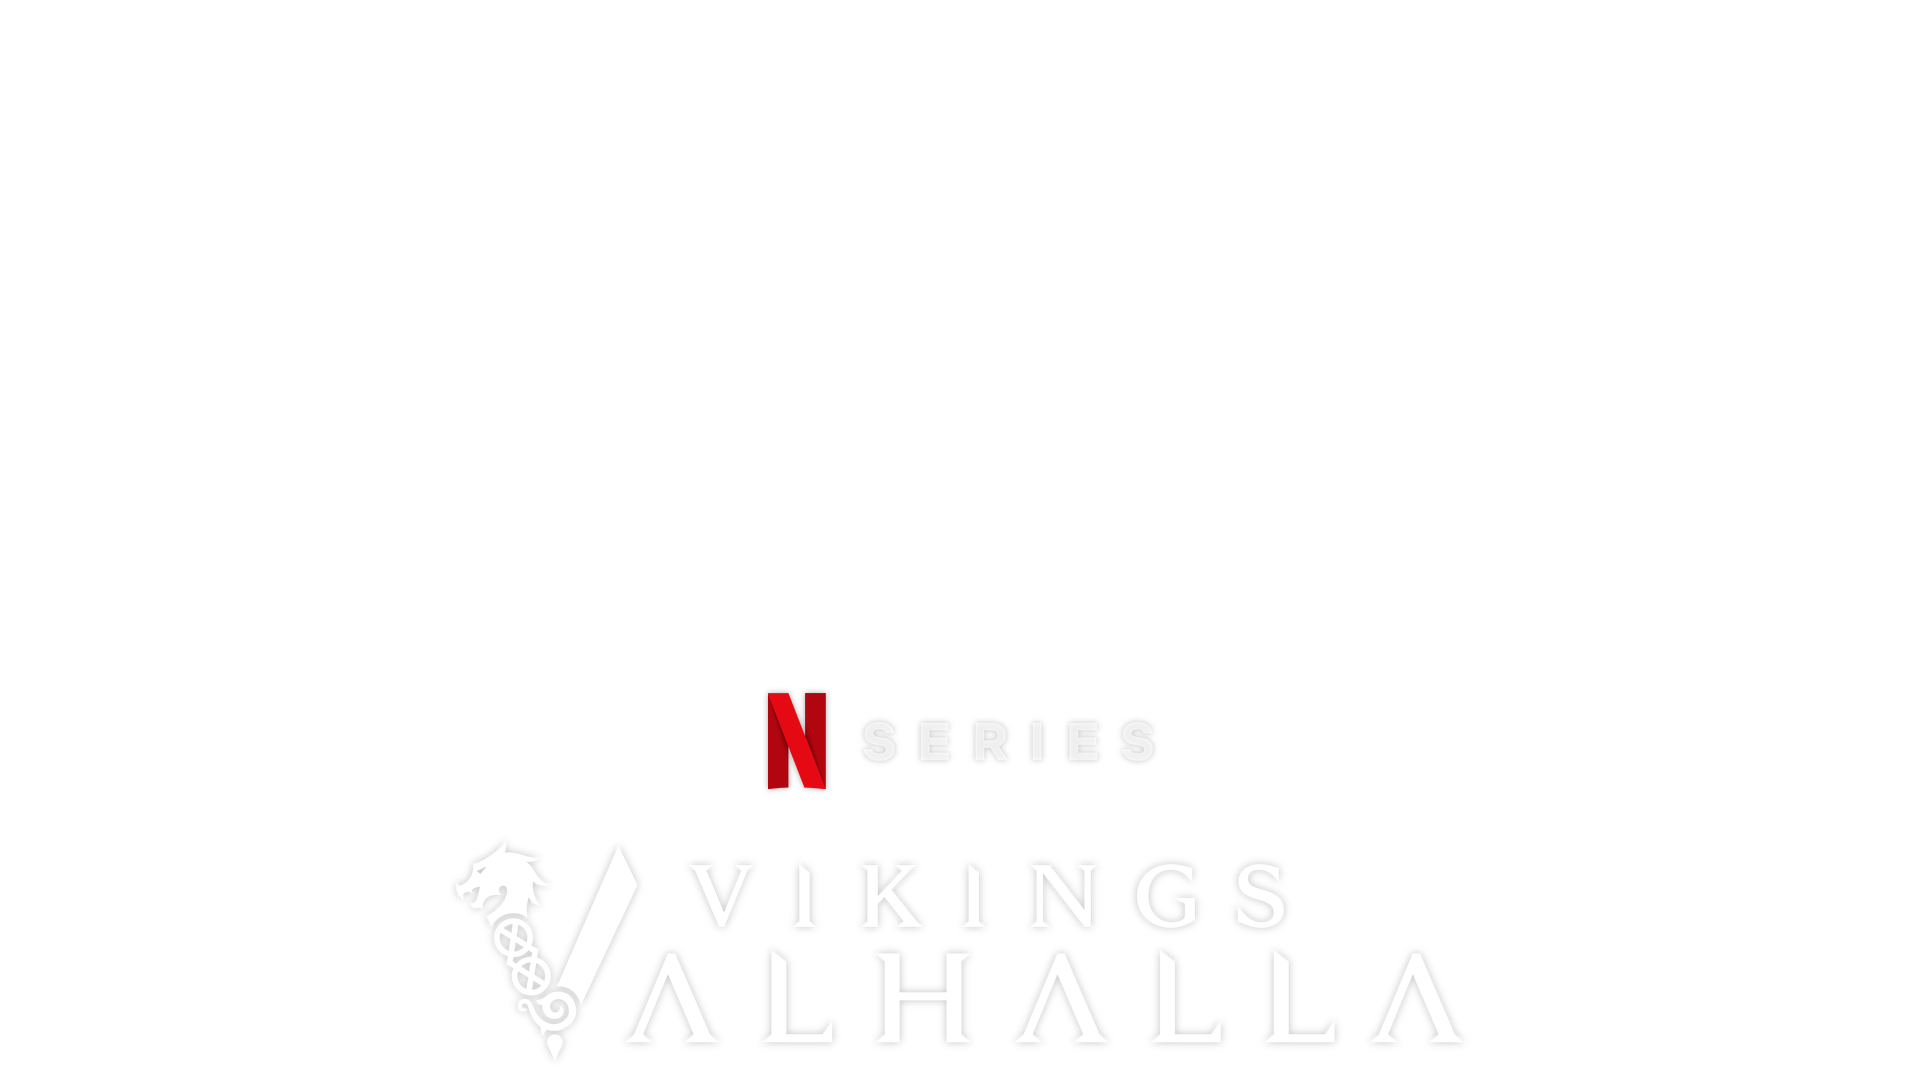 Vikings Valhalla - Vikings: Valhalla cast ⚔️ Vikings: Valhalla is an  upcoming Netflix Original historical drama series set 100 years after the  events depicted in Vikings original series